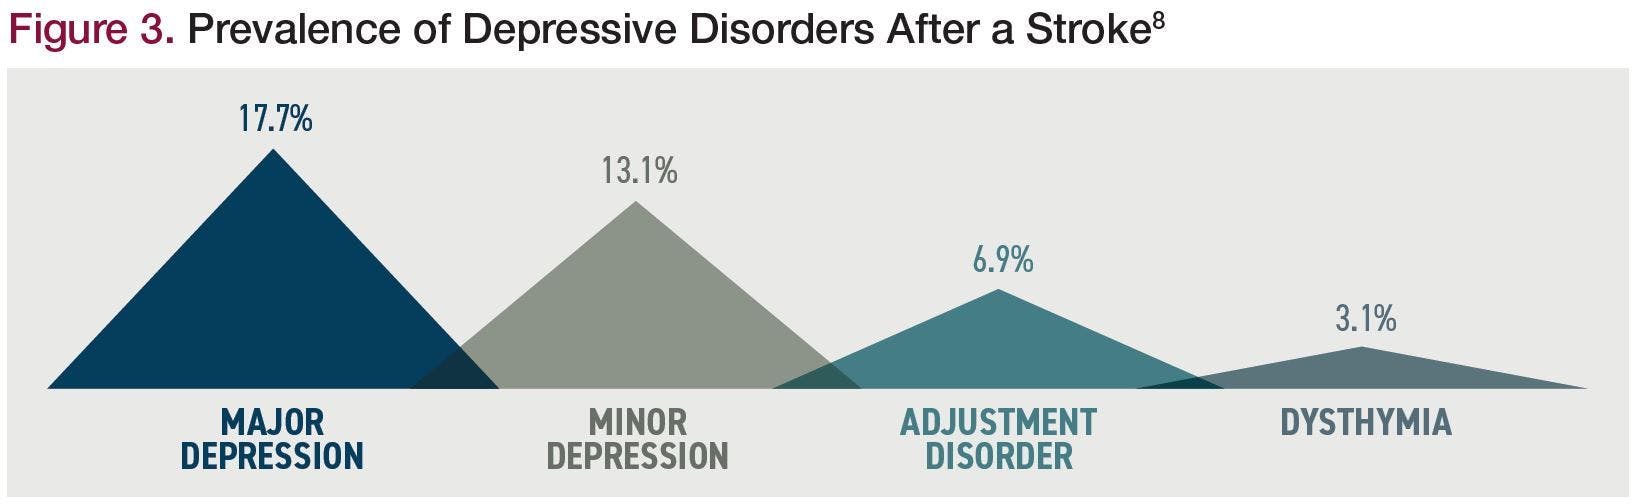 Prevalence of Depressive Disorders After a Stroke